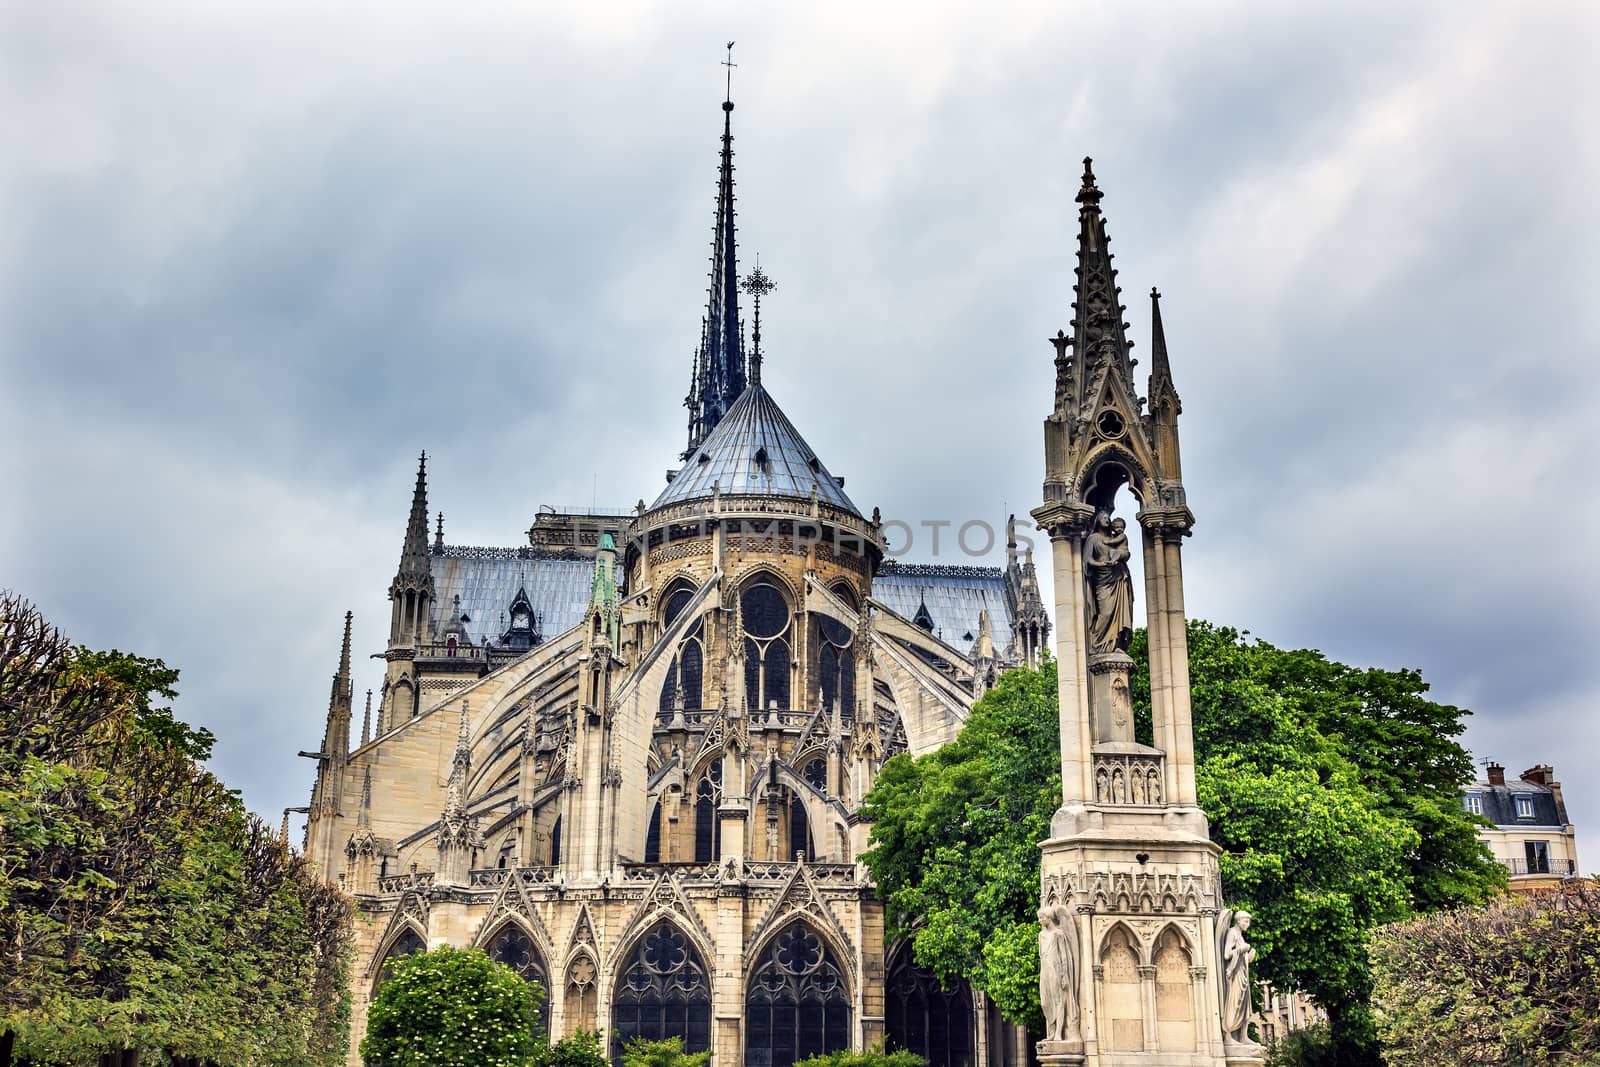 Rear Back Overcast Skies Flying Buttresses Notre Dame Cathedral Paris France.  Notre Dame was built between 1163 and 1250AD.  